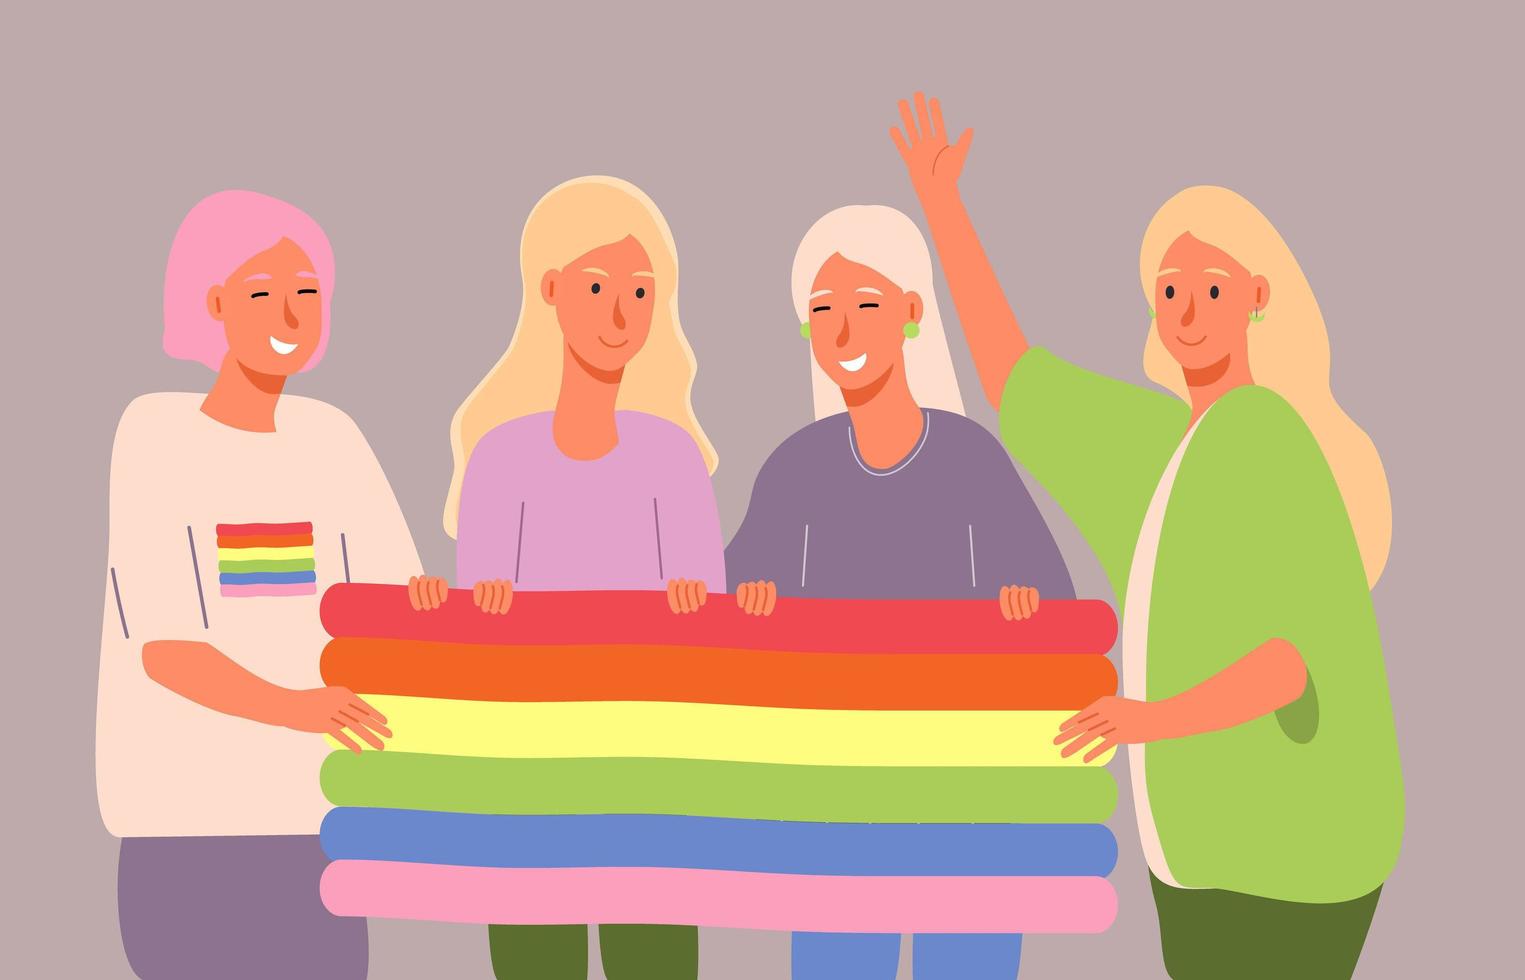 LGBT history month in October, week, day. Lesbians, bisexual girls are holding rainbow flag and laughing. vector